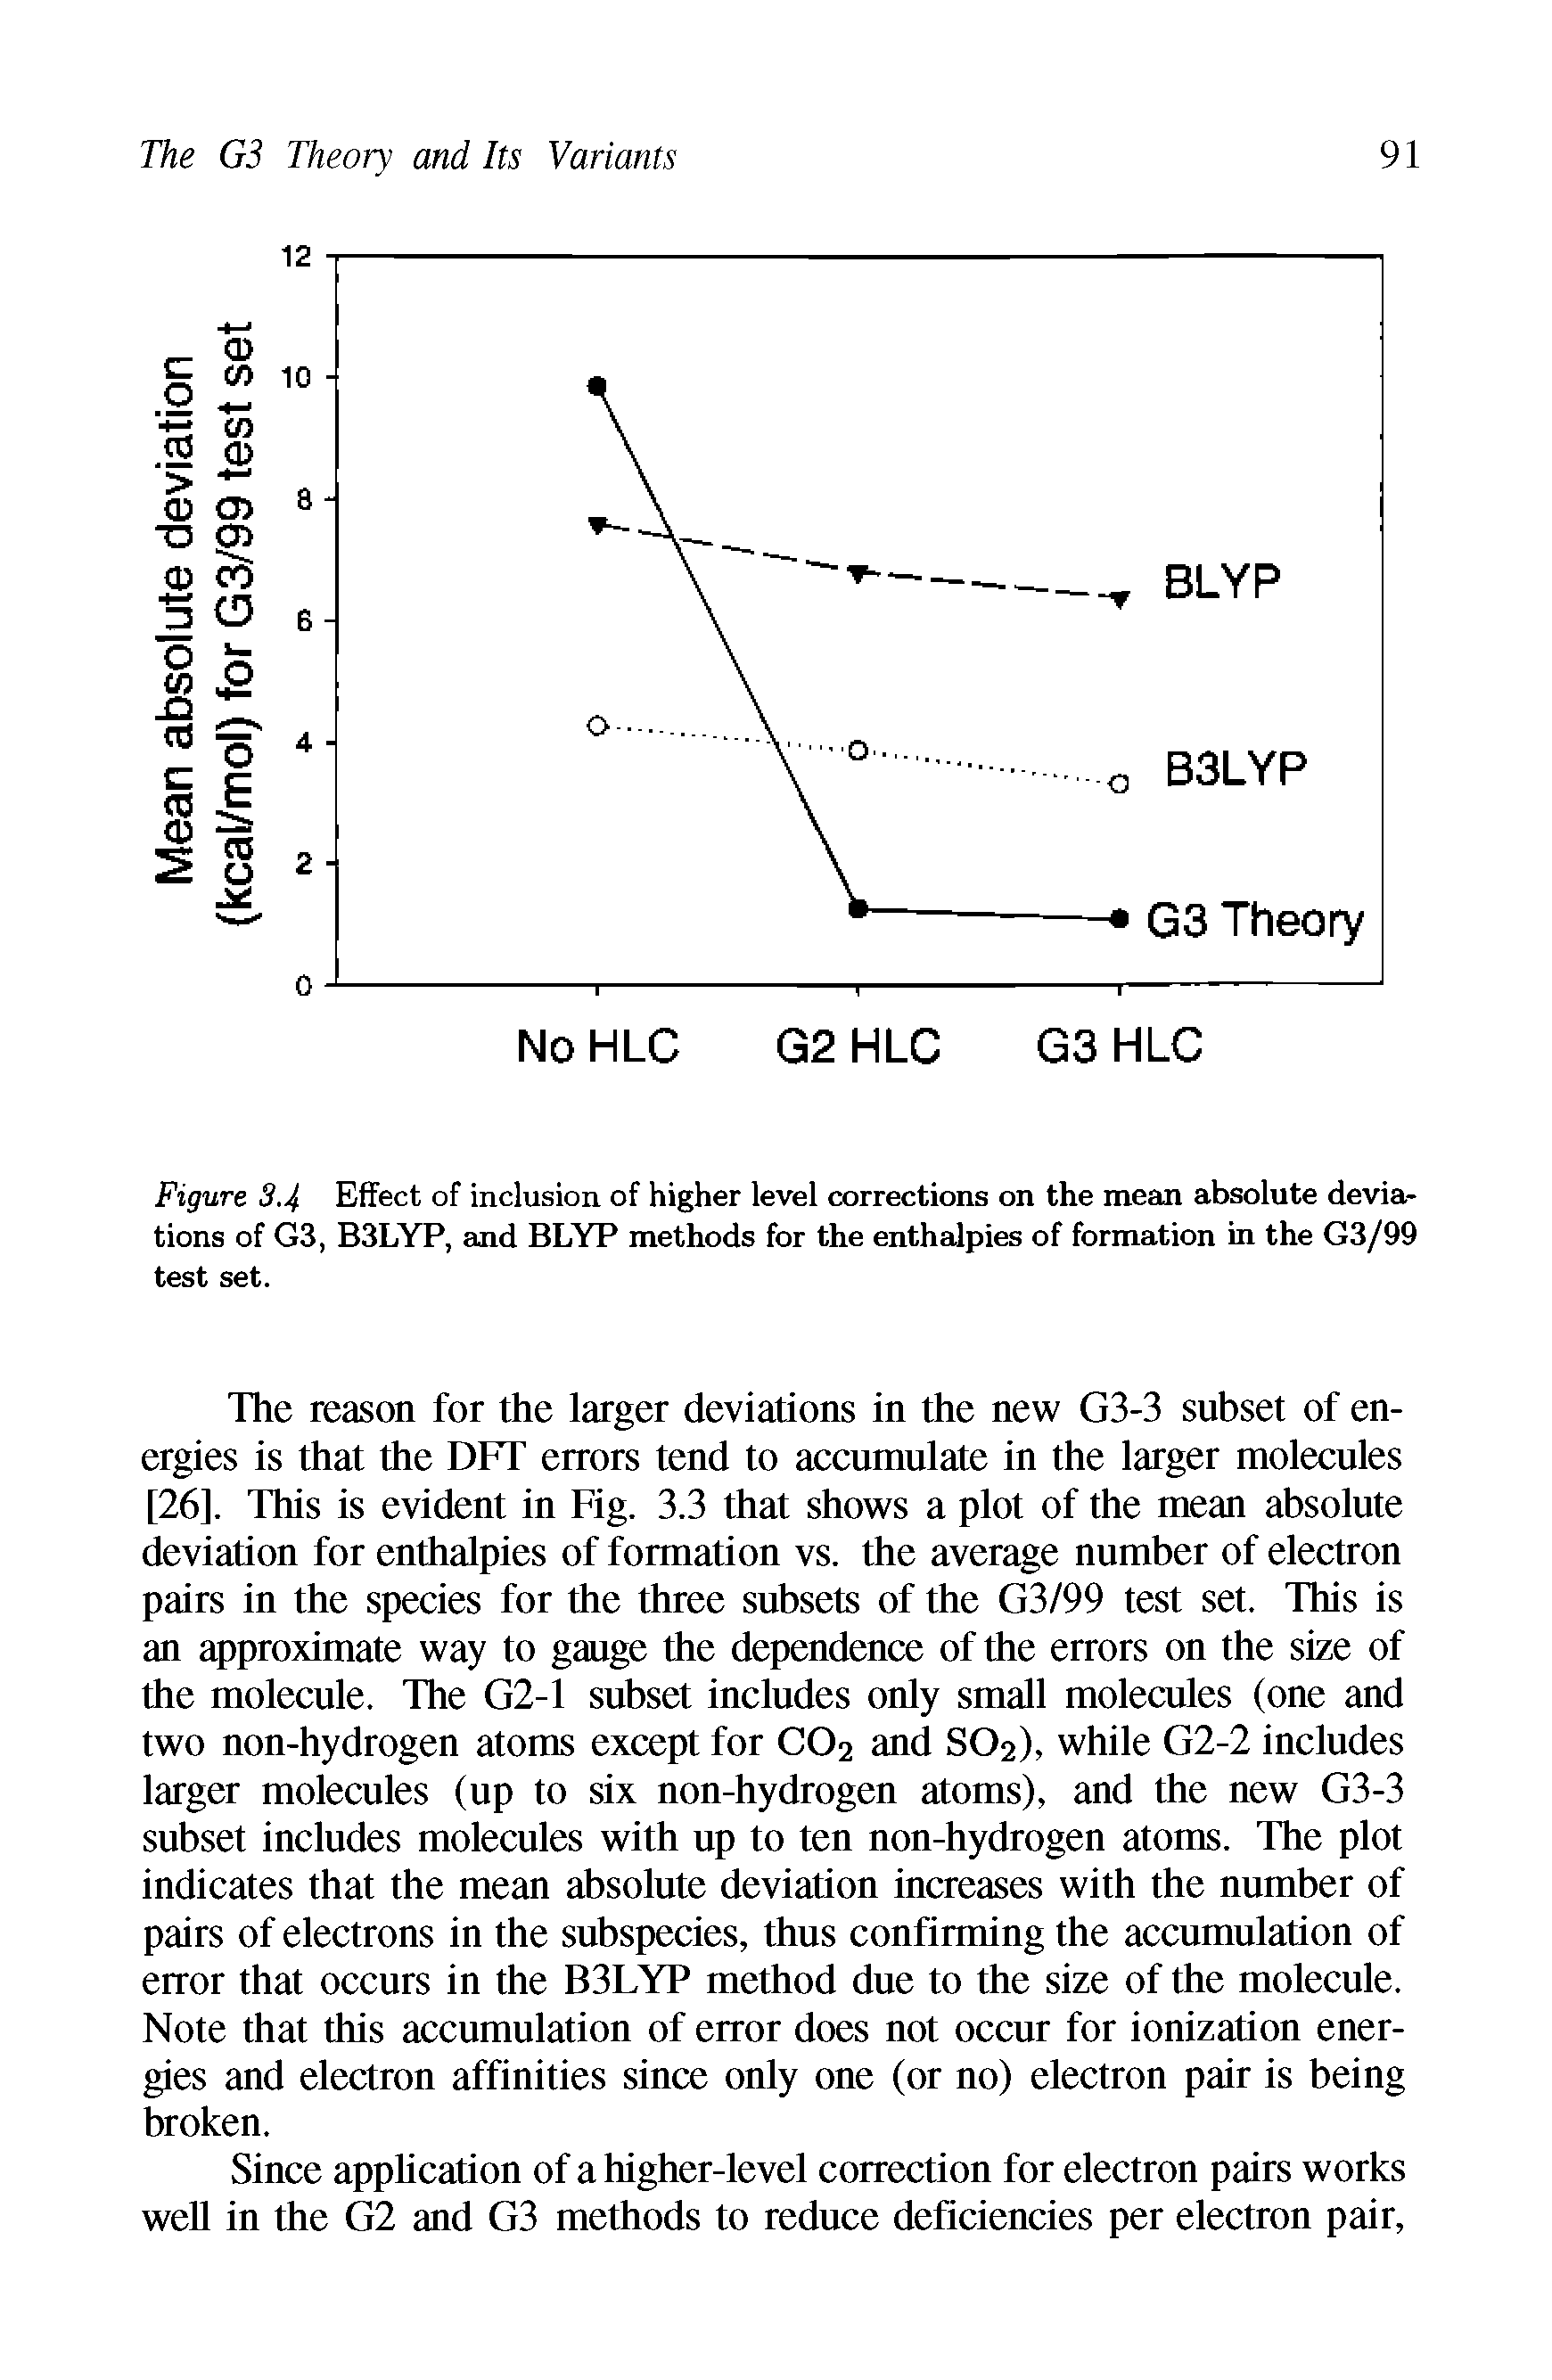 Figure 3.4 Effect of inclusion of higher level corrections on the mean absolute deviations of G3, B3LYP, and BLYP methods for the enthalpies of formation in the G3/99 test set.